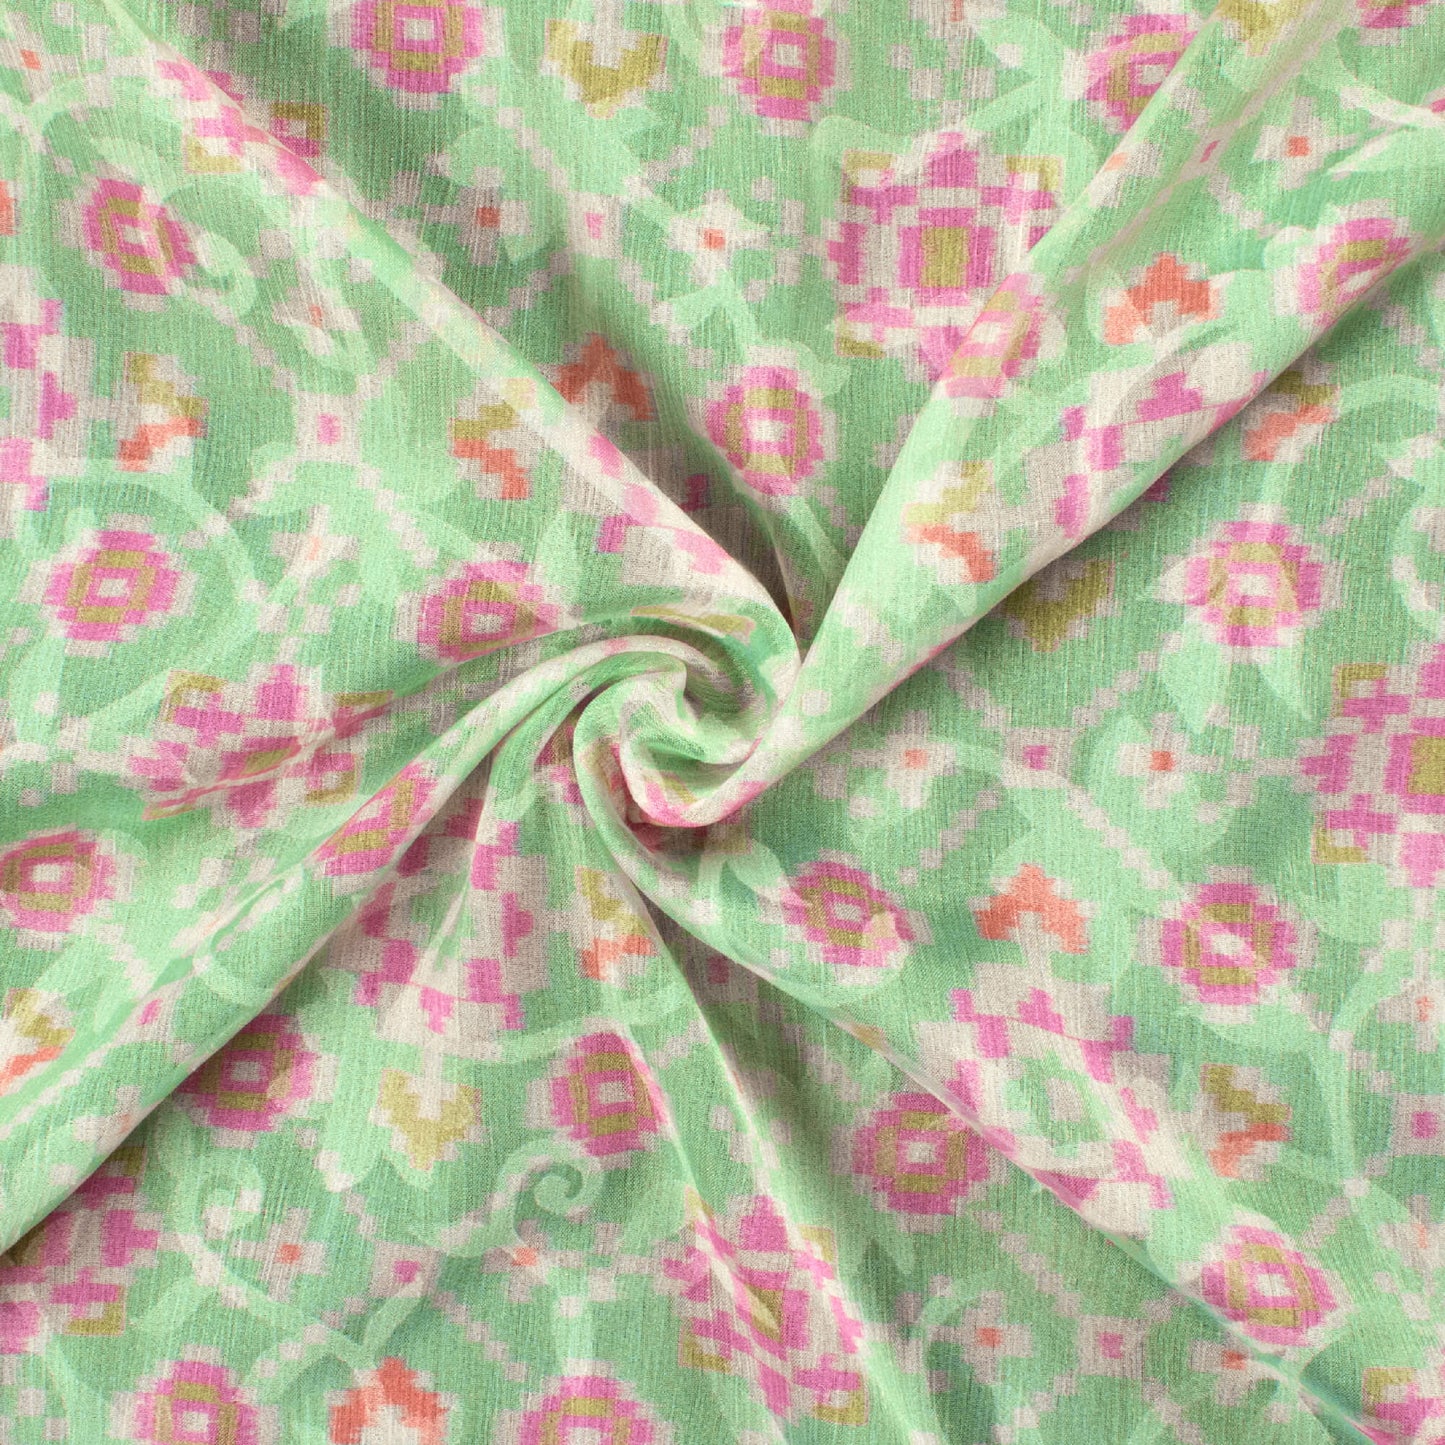 Mint Green And Deep Pink Patola Pattern Digital Print Floral Brasso Fabric